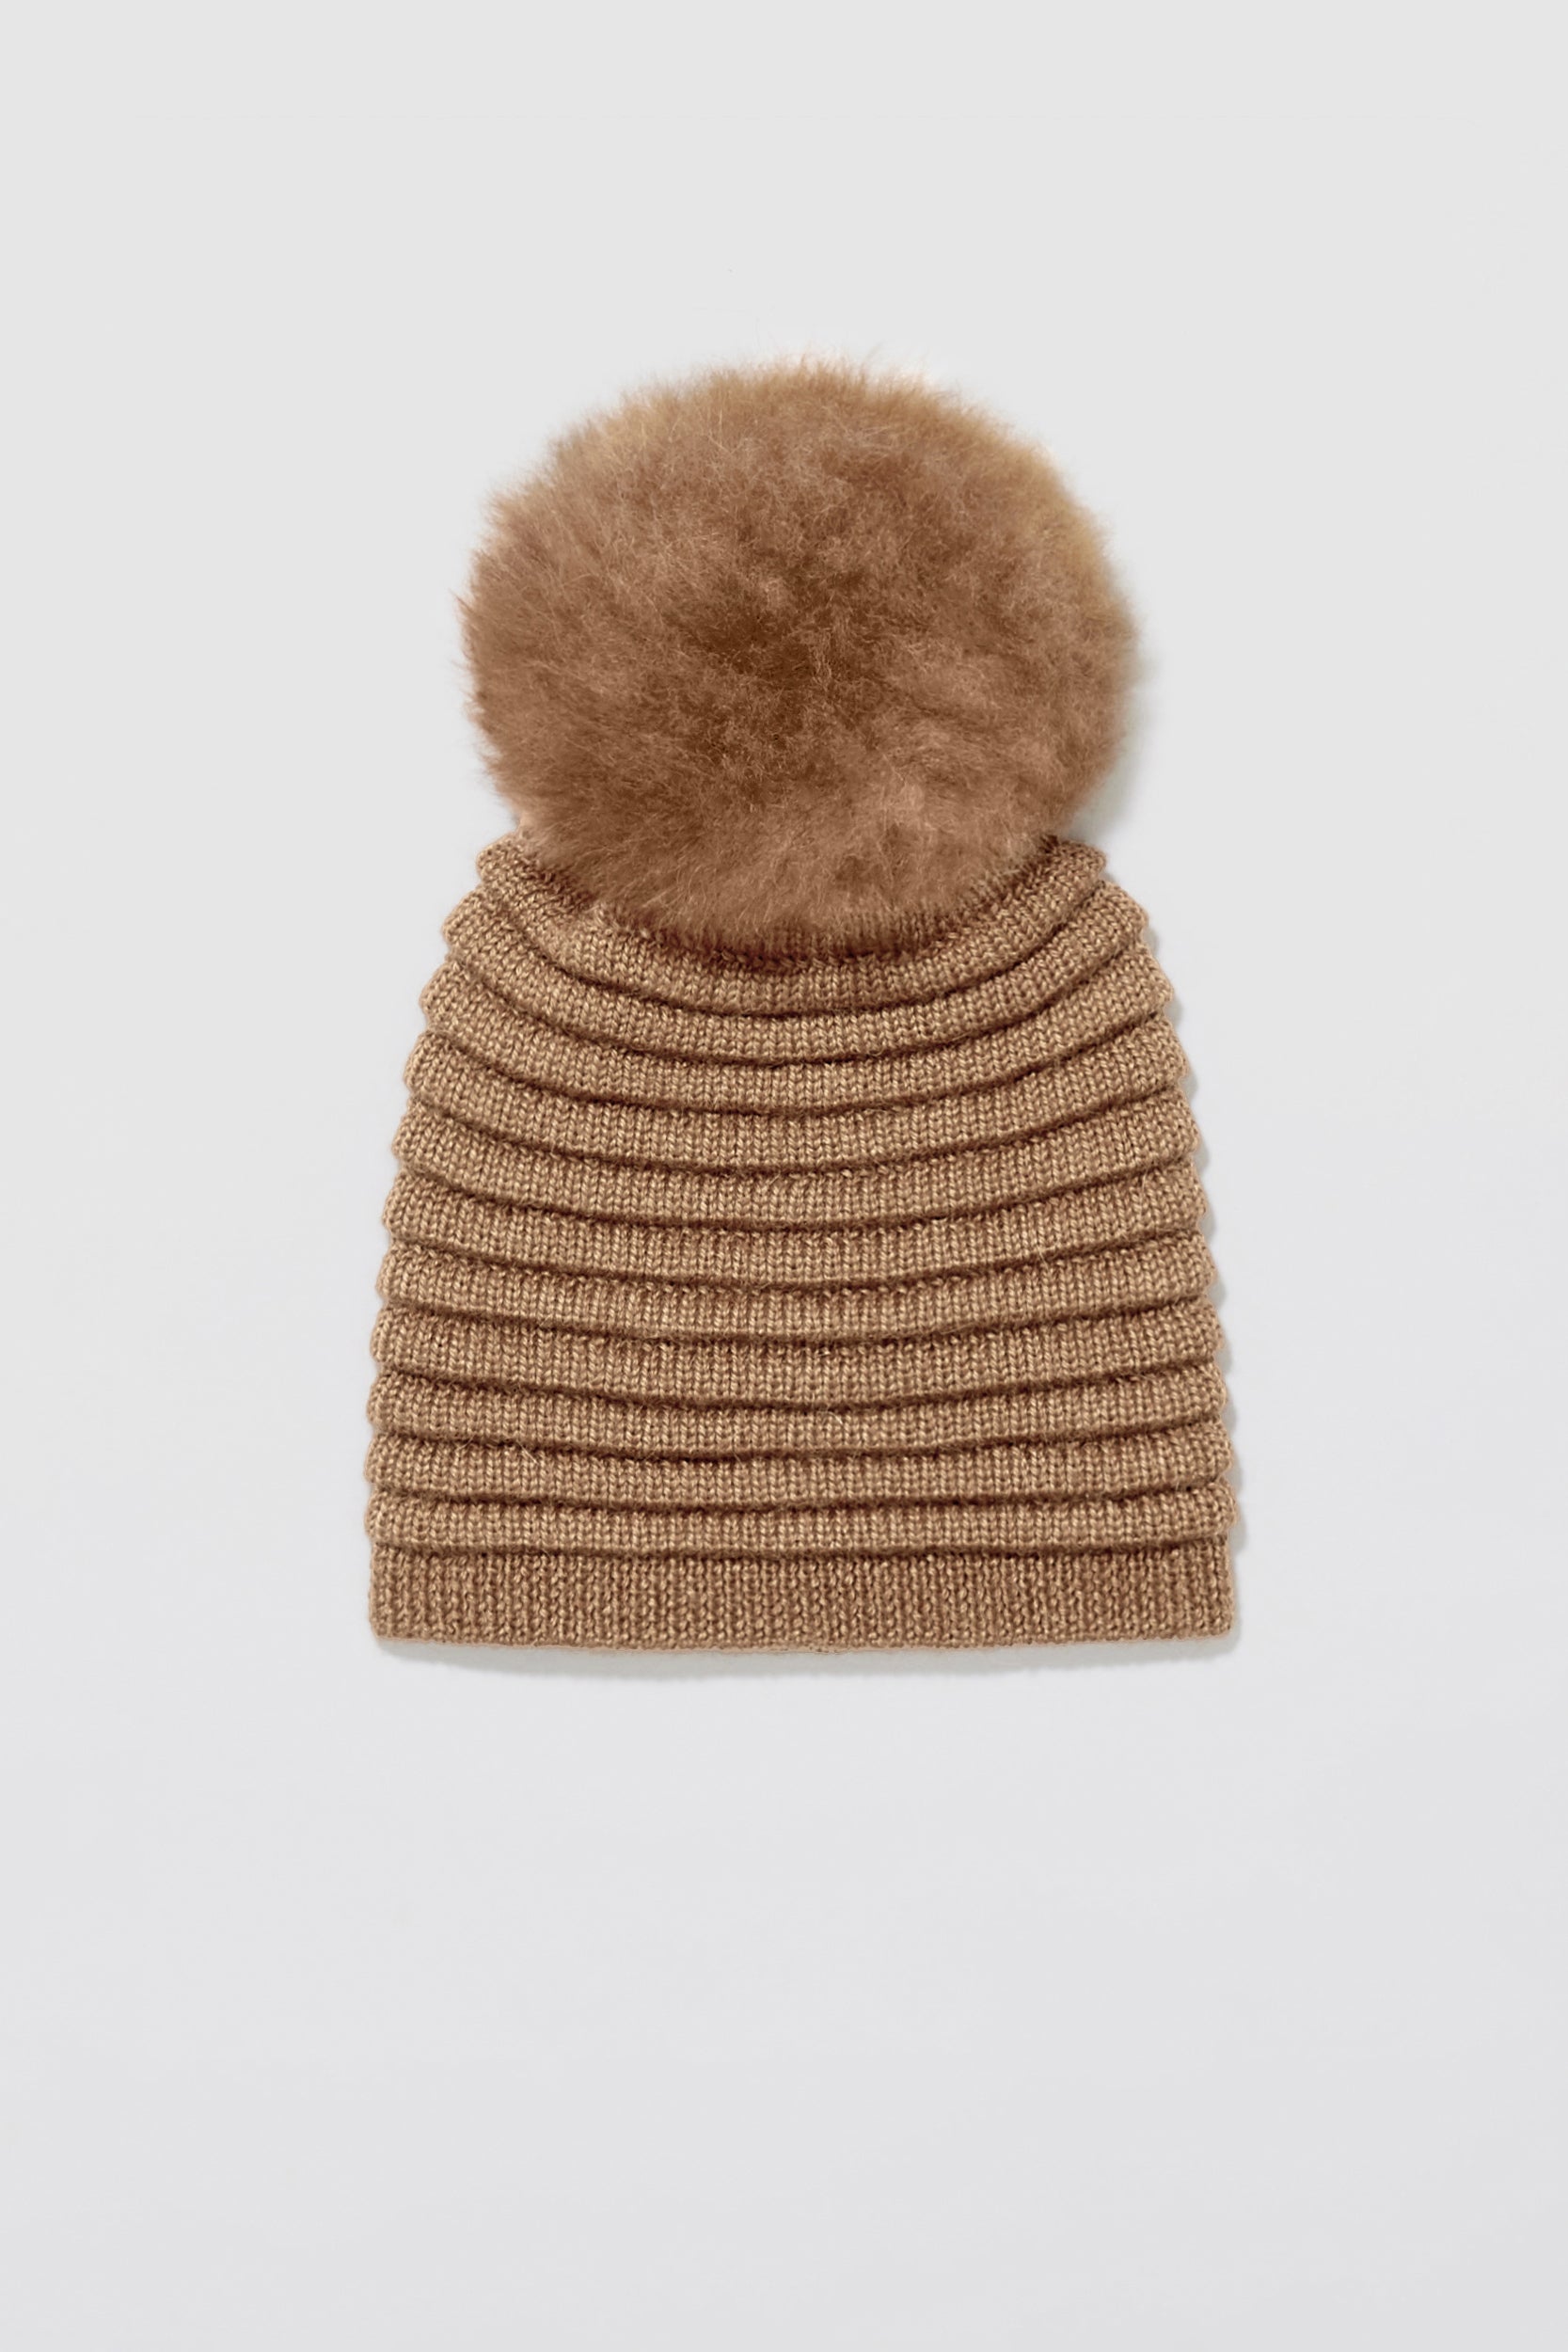 Beanie with Pom - Camel Brown Child/Adult